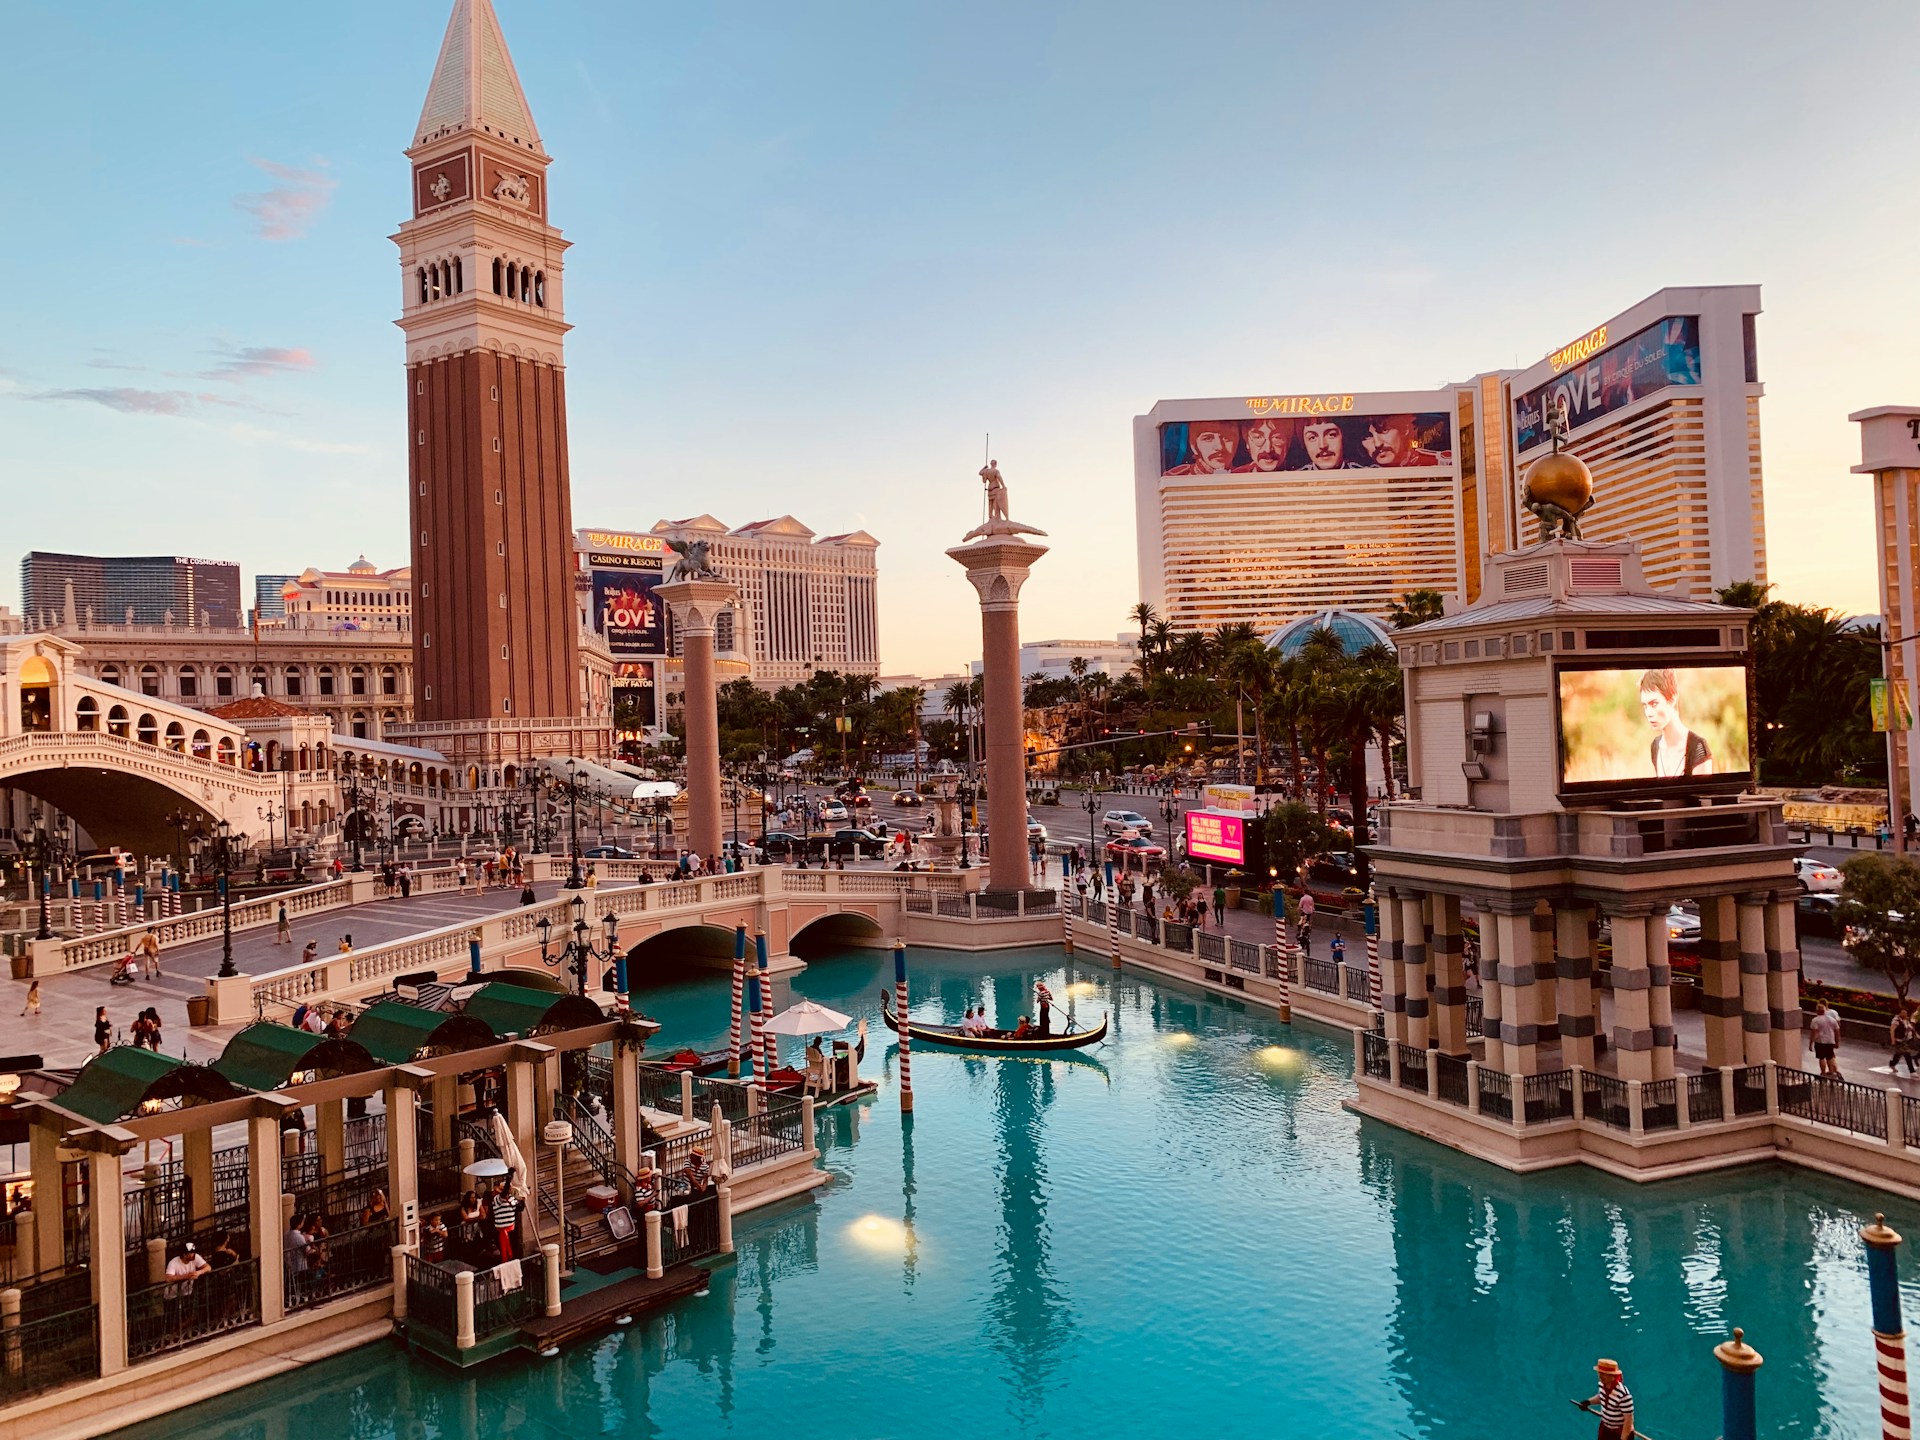 How to book a cheap hotel in Las Vegas?